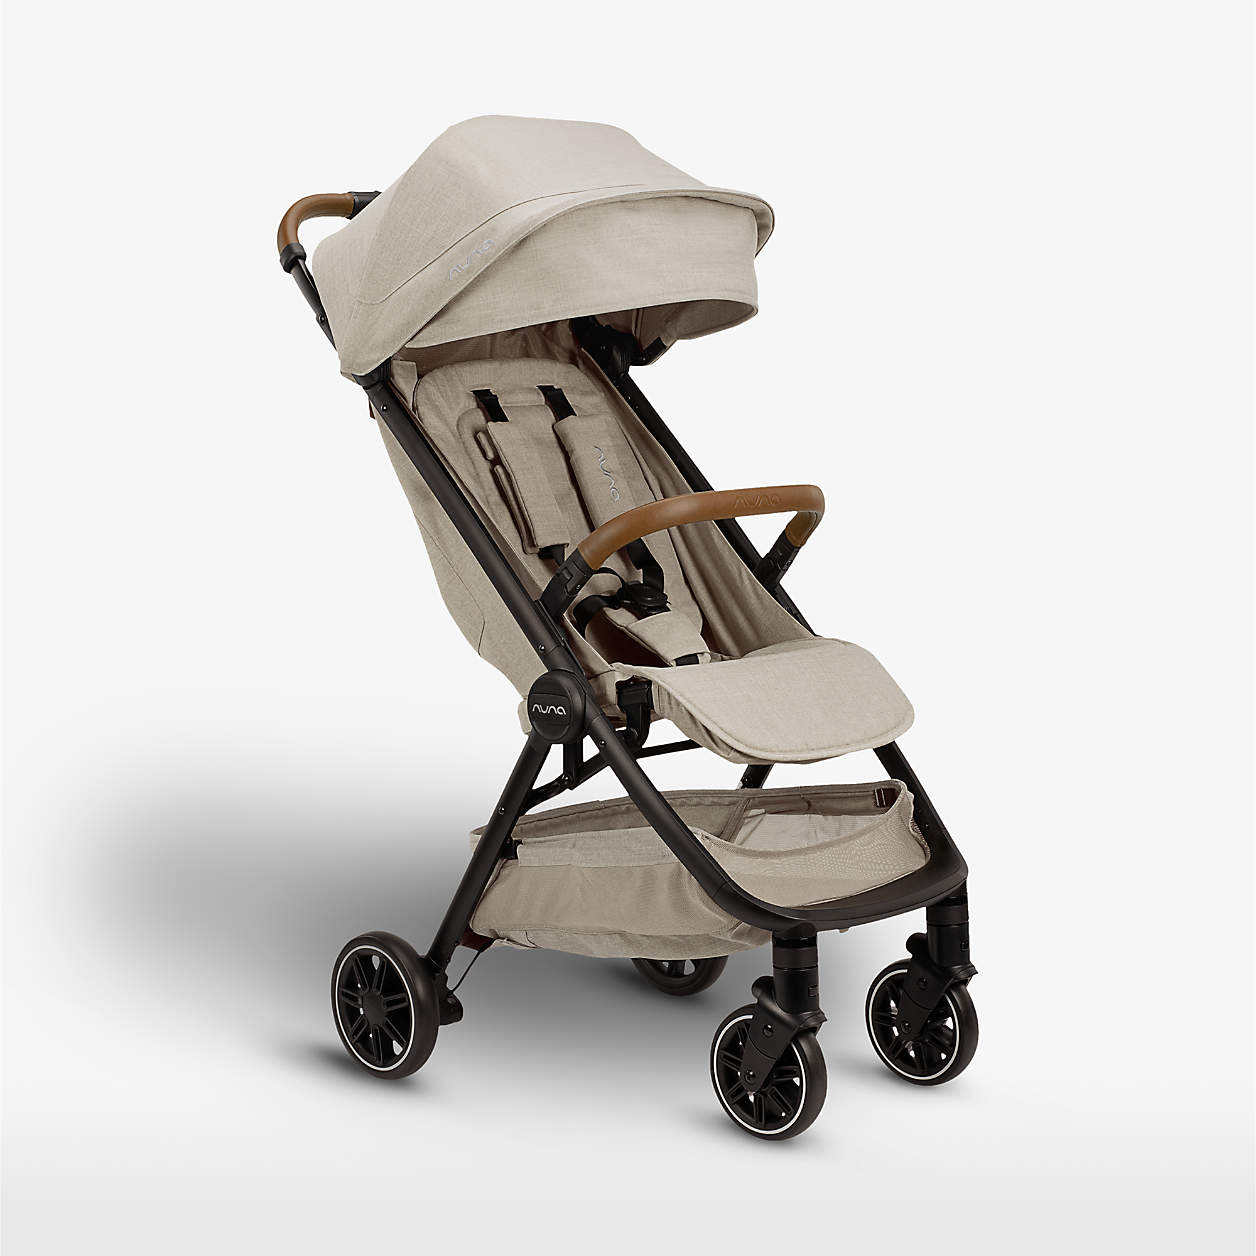 nuna travel compact stroller review